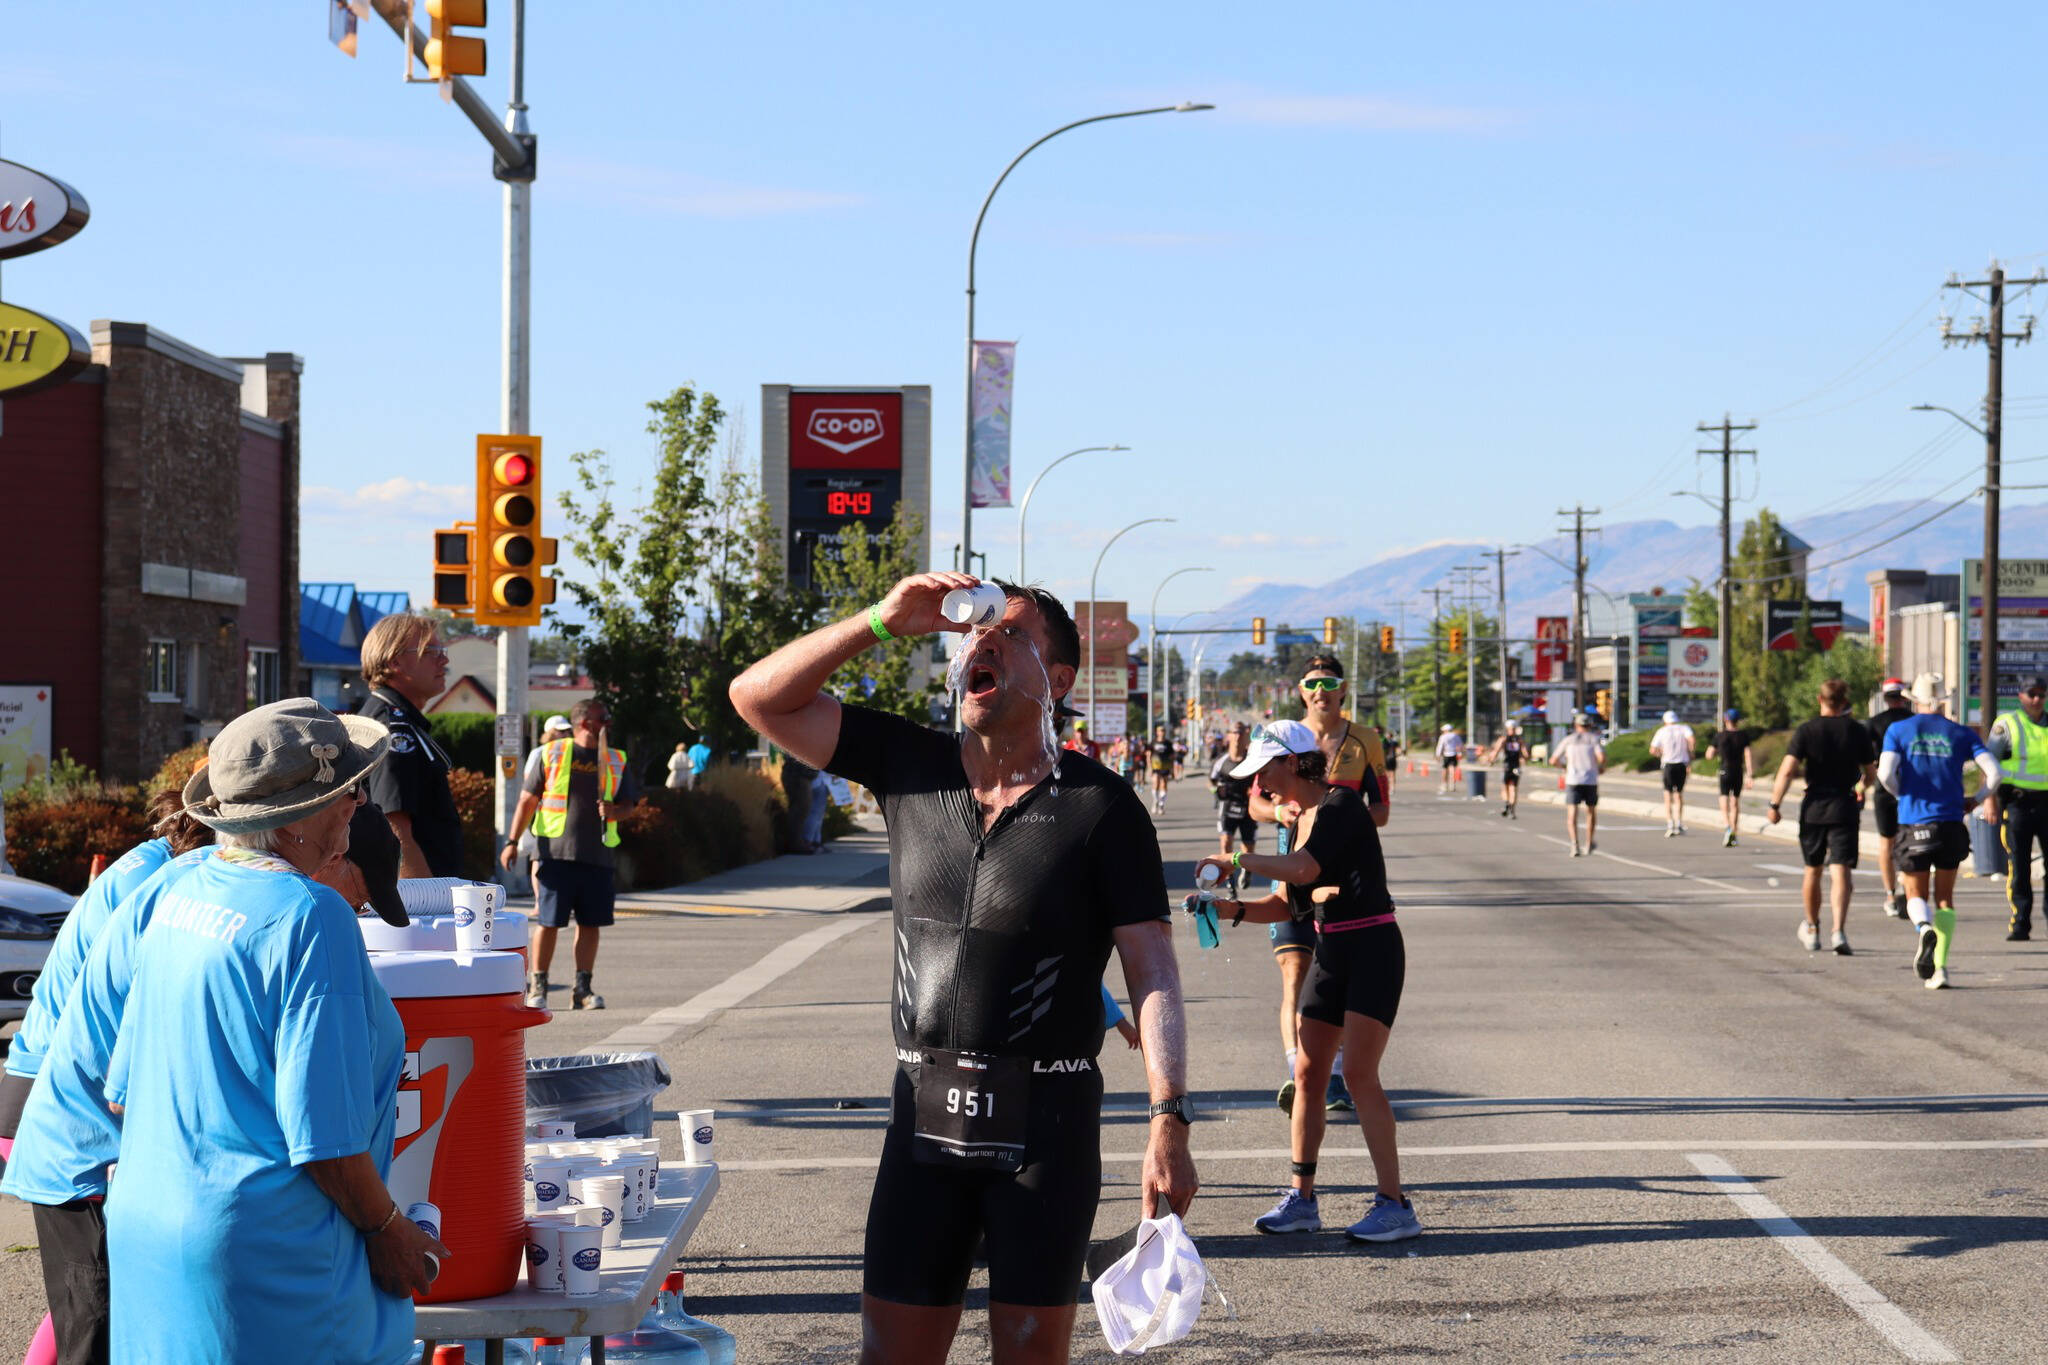 Ironman Canada saw 1,500 athletes come to Penticton, almost all giving glowing reviews of their experience here. (City of Penticton)